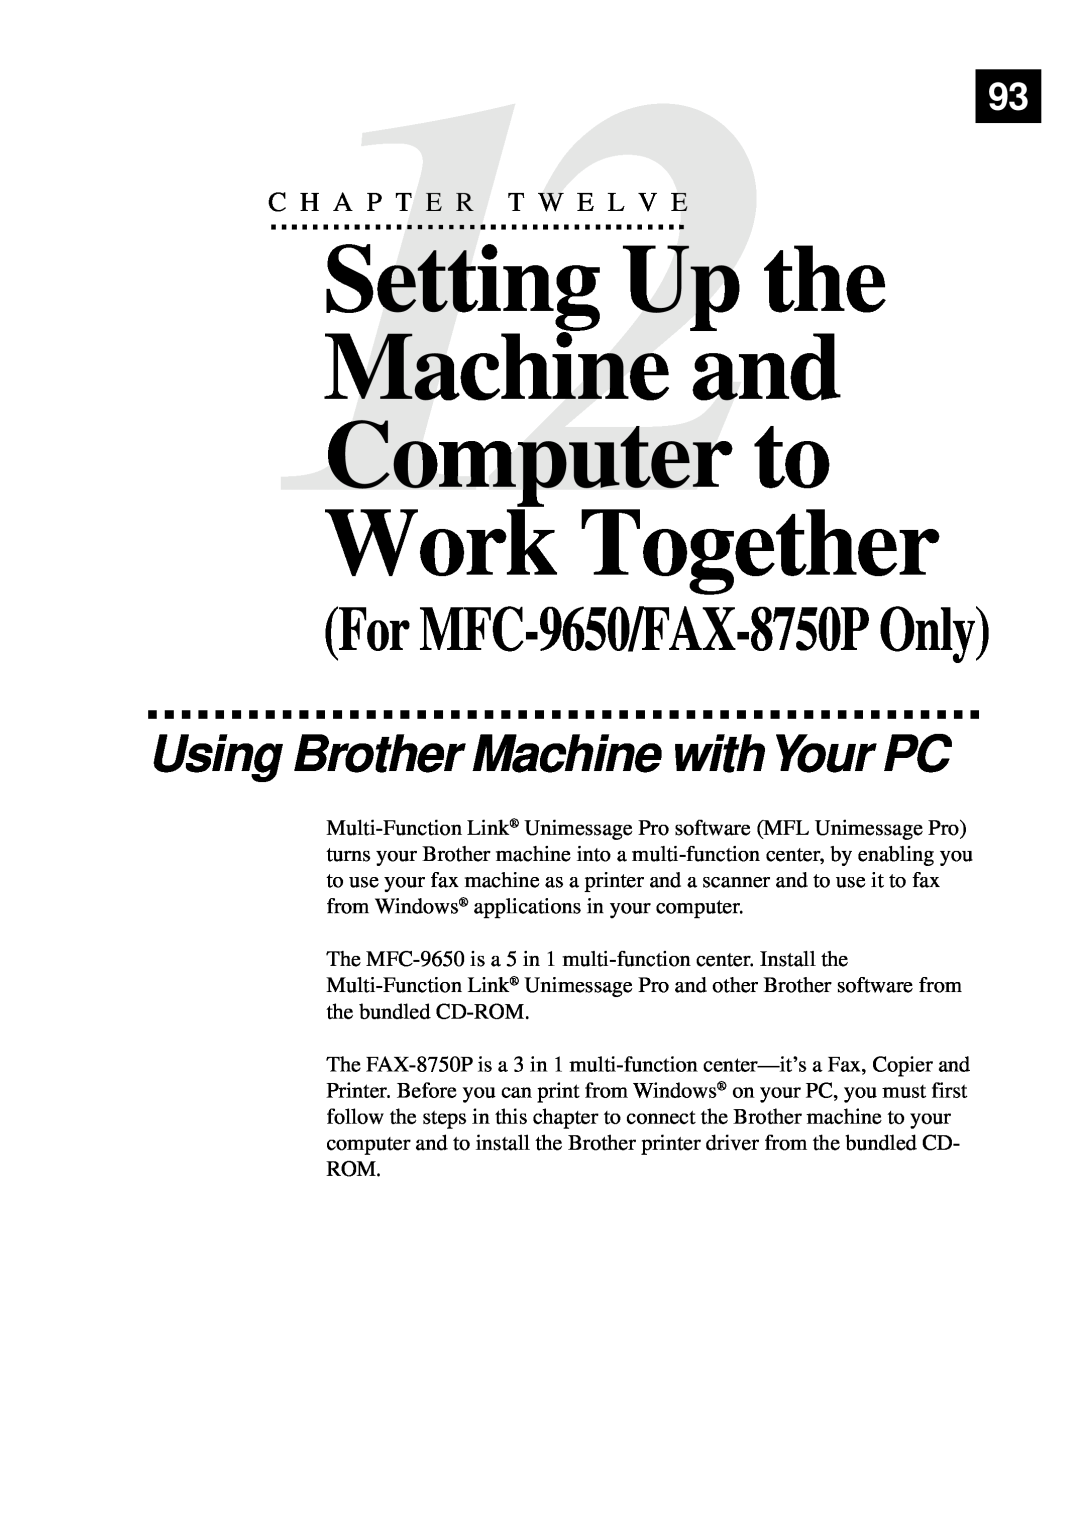 Brother Setting Up the Machine and Computer to Work Together, For MFC-9650/FAX-8750P Only, C12H A P T E R T W E L V E93 